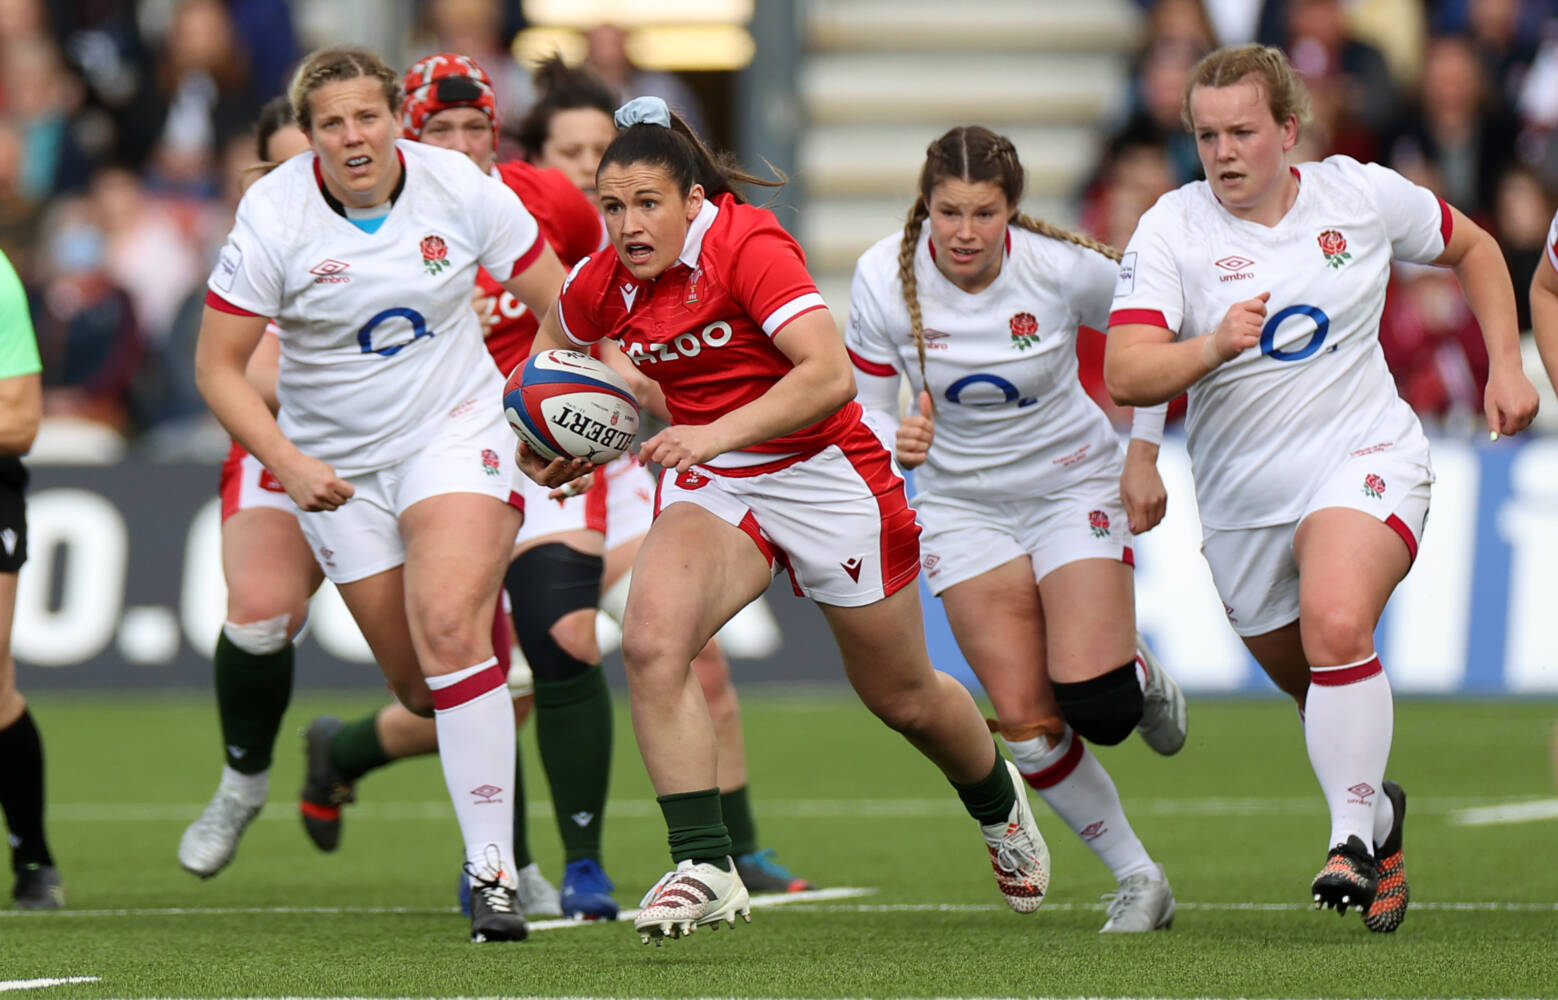 Kayleigh Powell During a Six Nations Rugby game playing for Wales against England